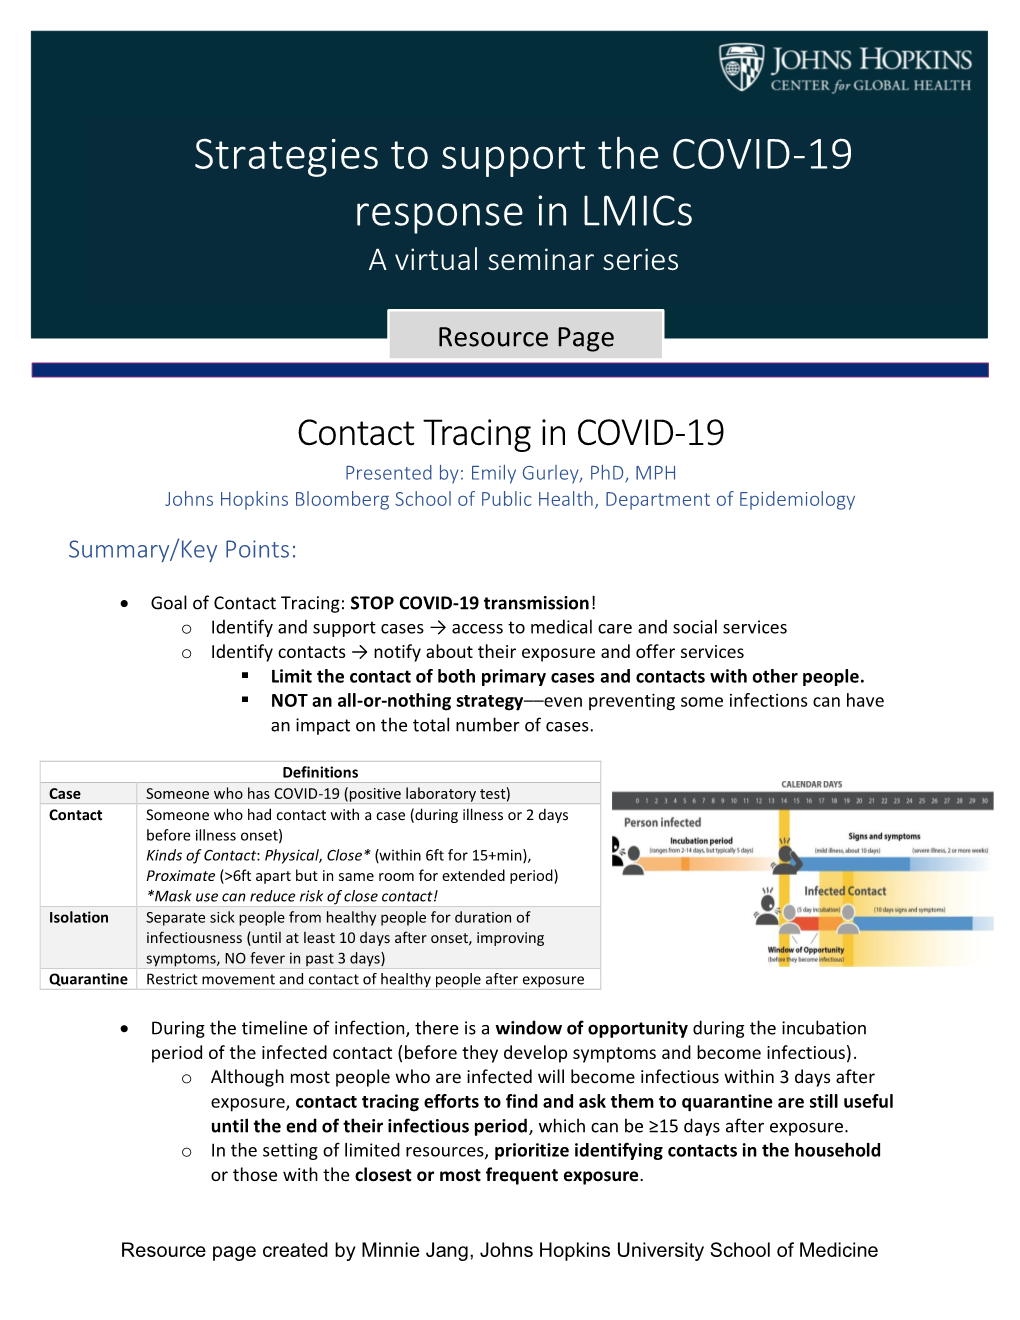 Strategies to Support the COVID-19 Response in Lmics